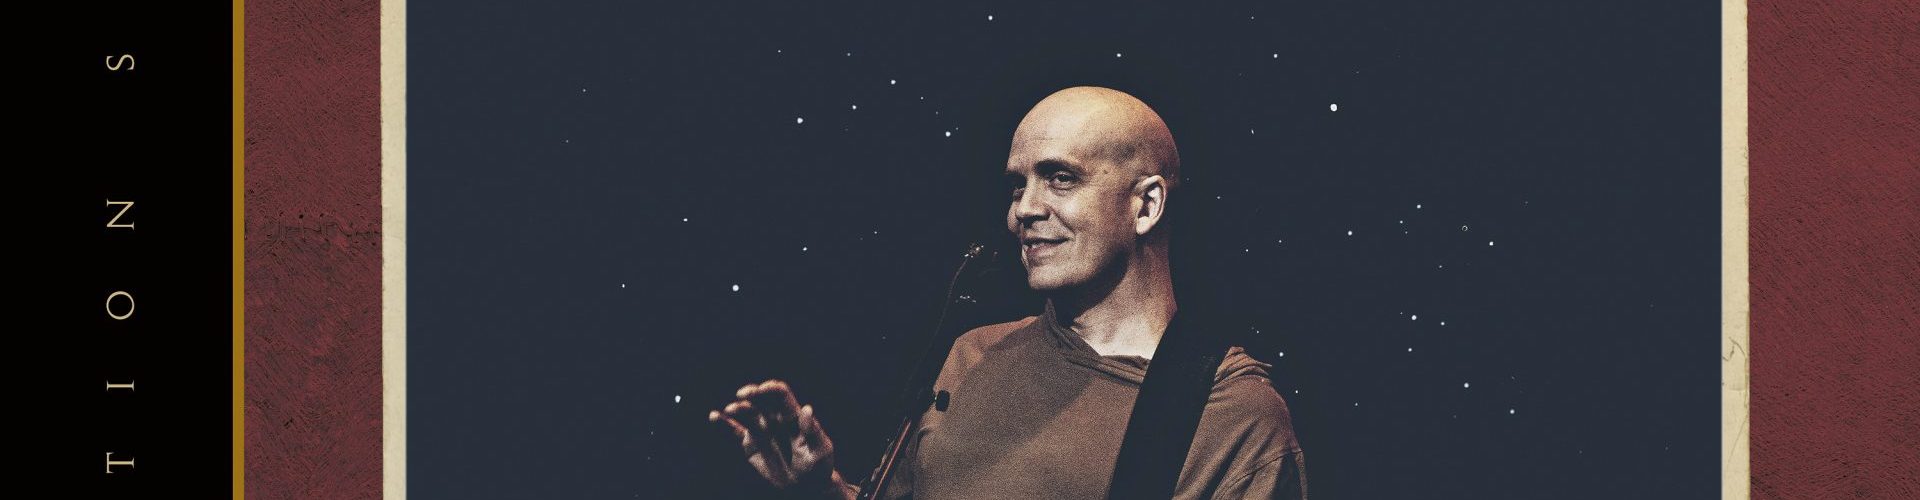 Devin Townsend – Devolution Series #1 – Acoustically Inclined, Live in Leeds